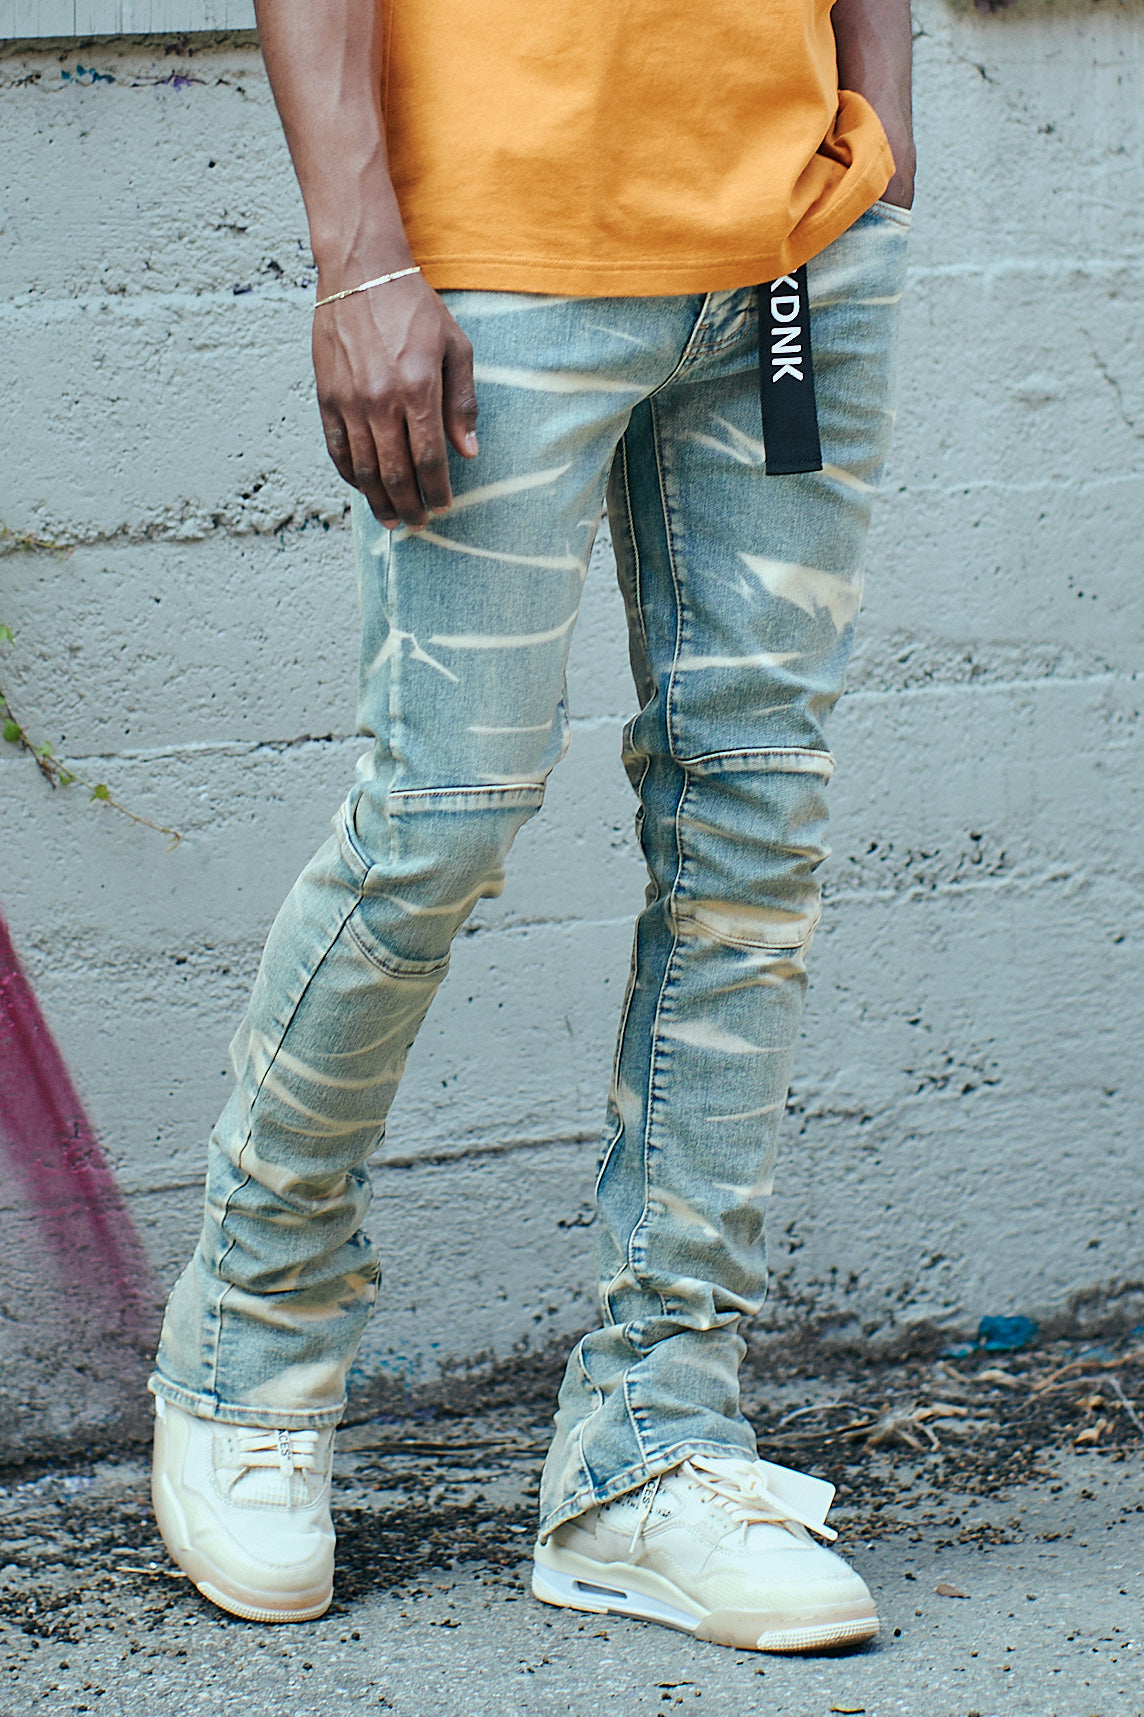 5-pocket skinny stacked jeans in stretch denim  Long zippers in back of bottom parts of pants w/ *backing inside